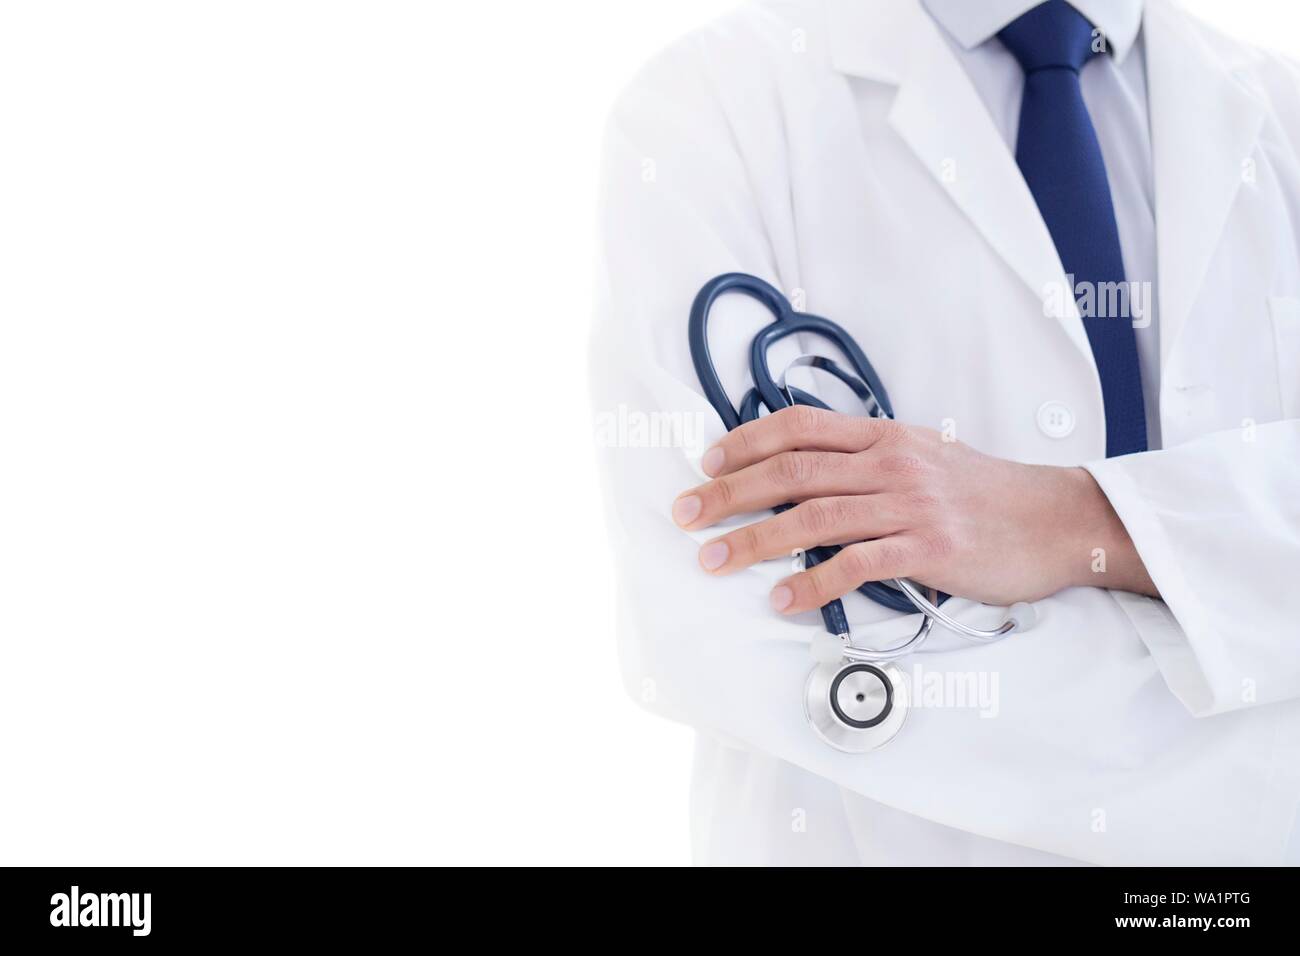 Doctor holding stethoscope, close-up. Banque D'Images